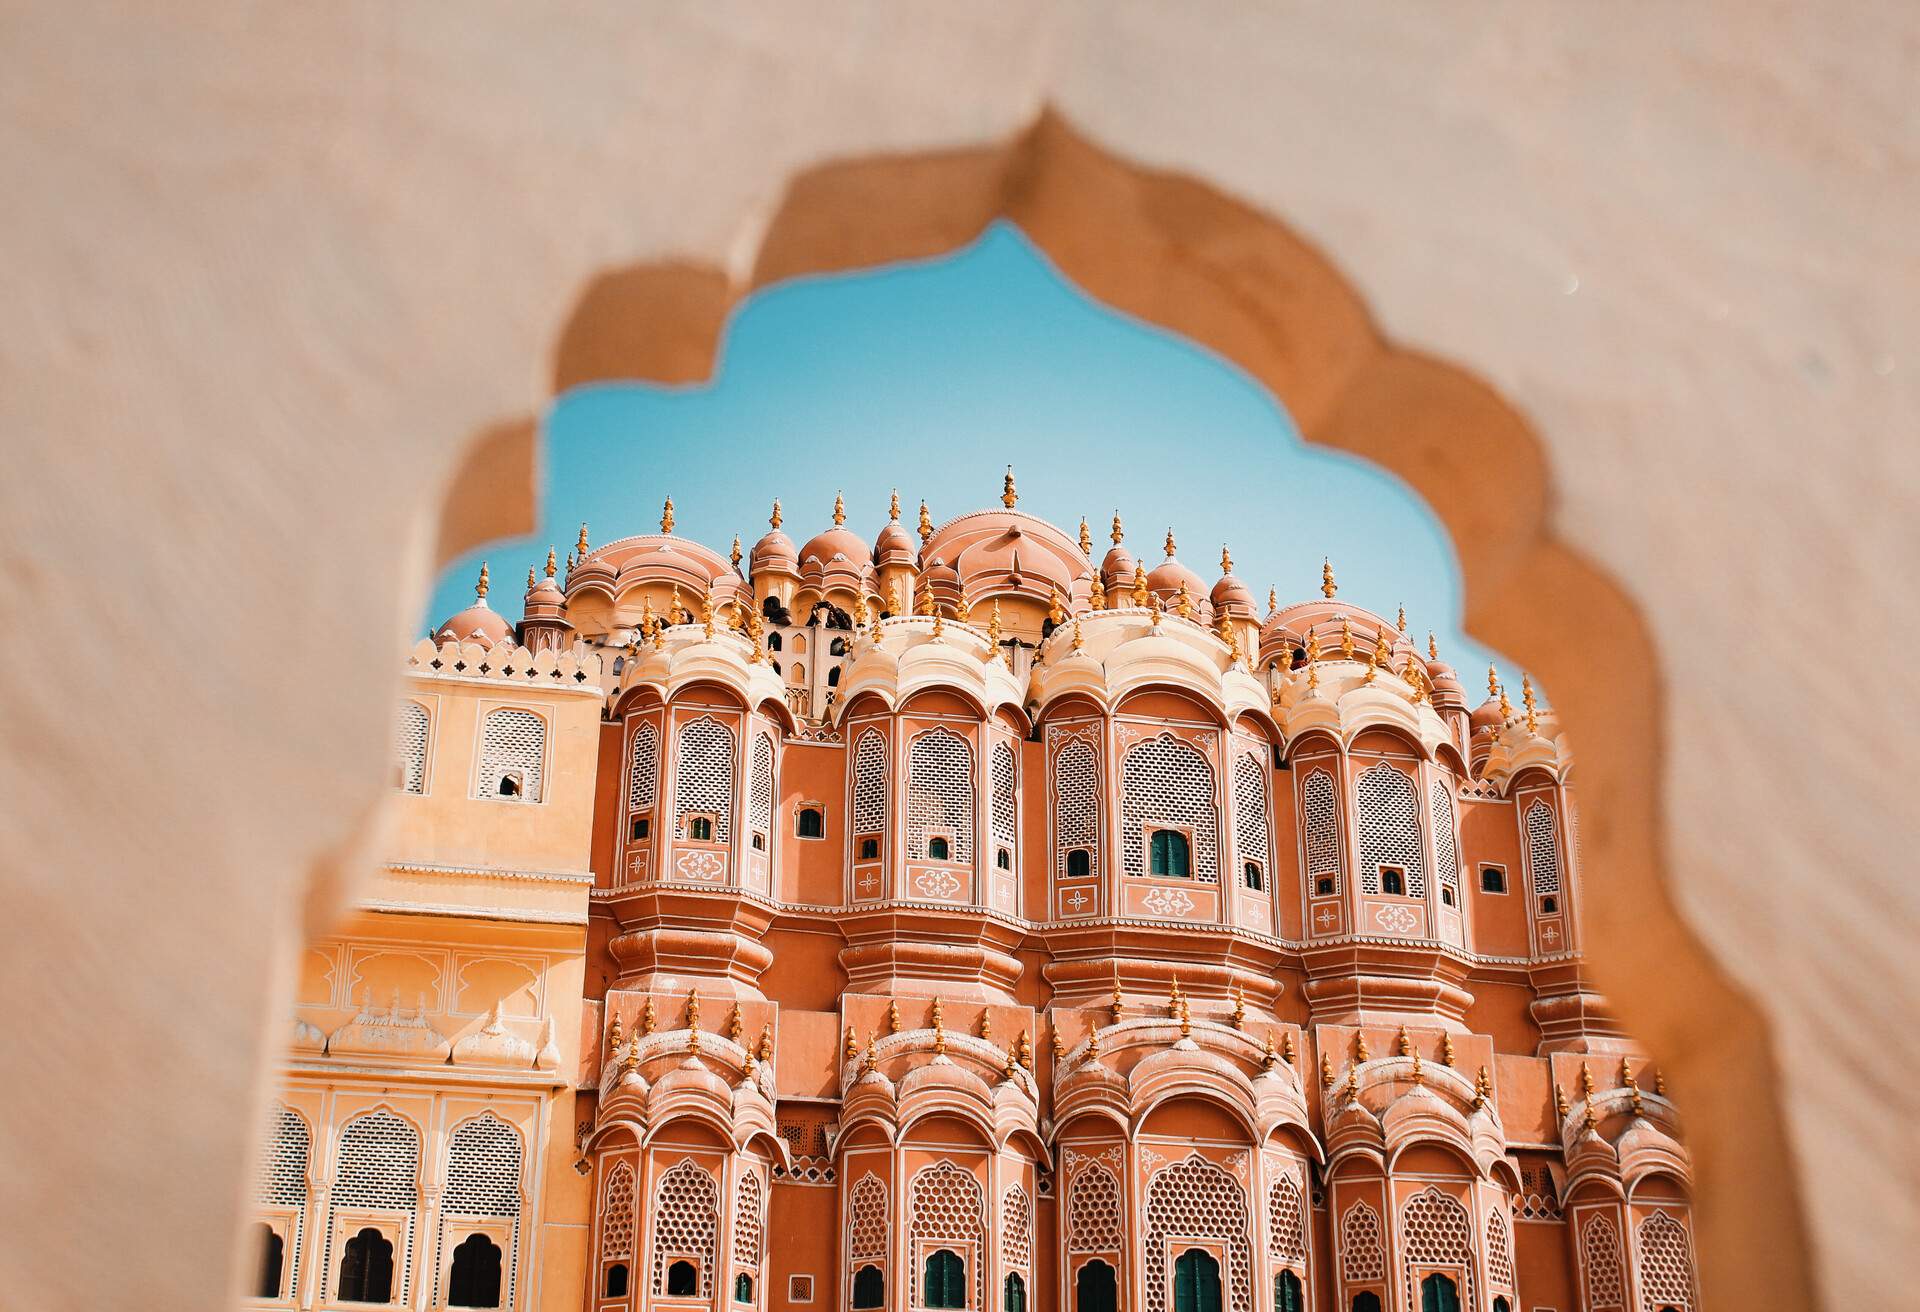 Inside of the Hawa Mahal or The palace of winds at Jaipur India